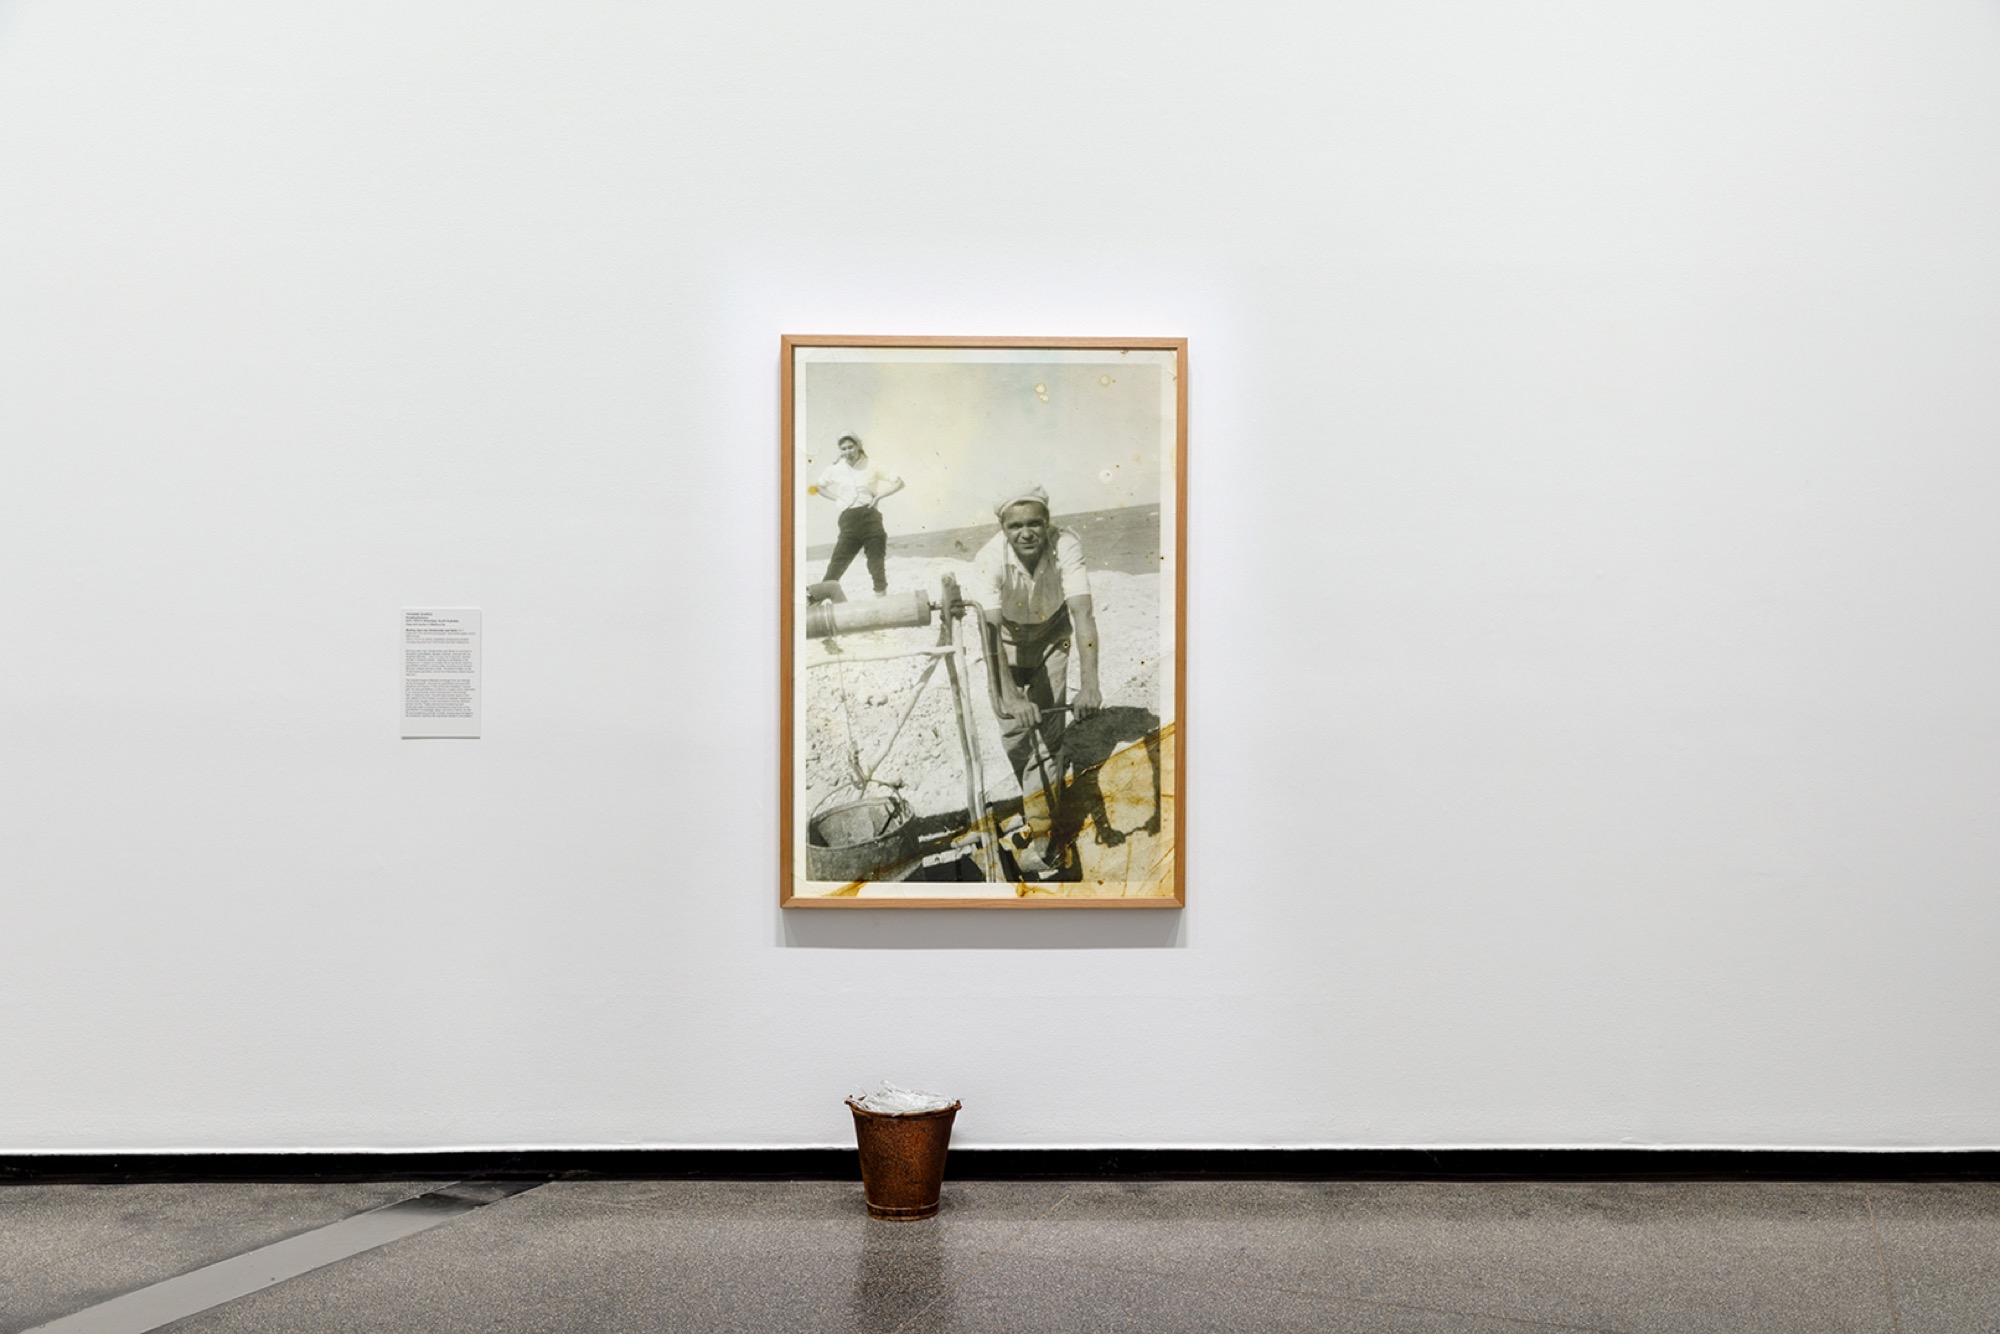 Yhonnie Scarce, <em>Working class man (Andamooka opal fields)</em>, installation view, 2017. Australian Centre for Contemporary Art, Melbourne. Courtesy the artist and THIS IS NO FANTASY, Melbourne. Photo: Andrew Curtis